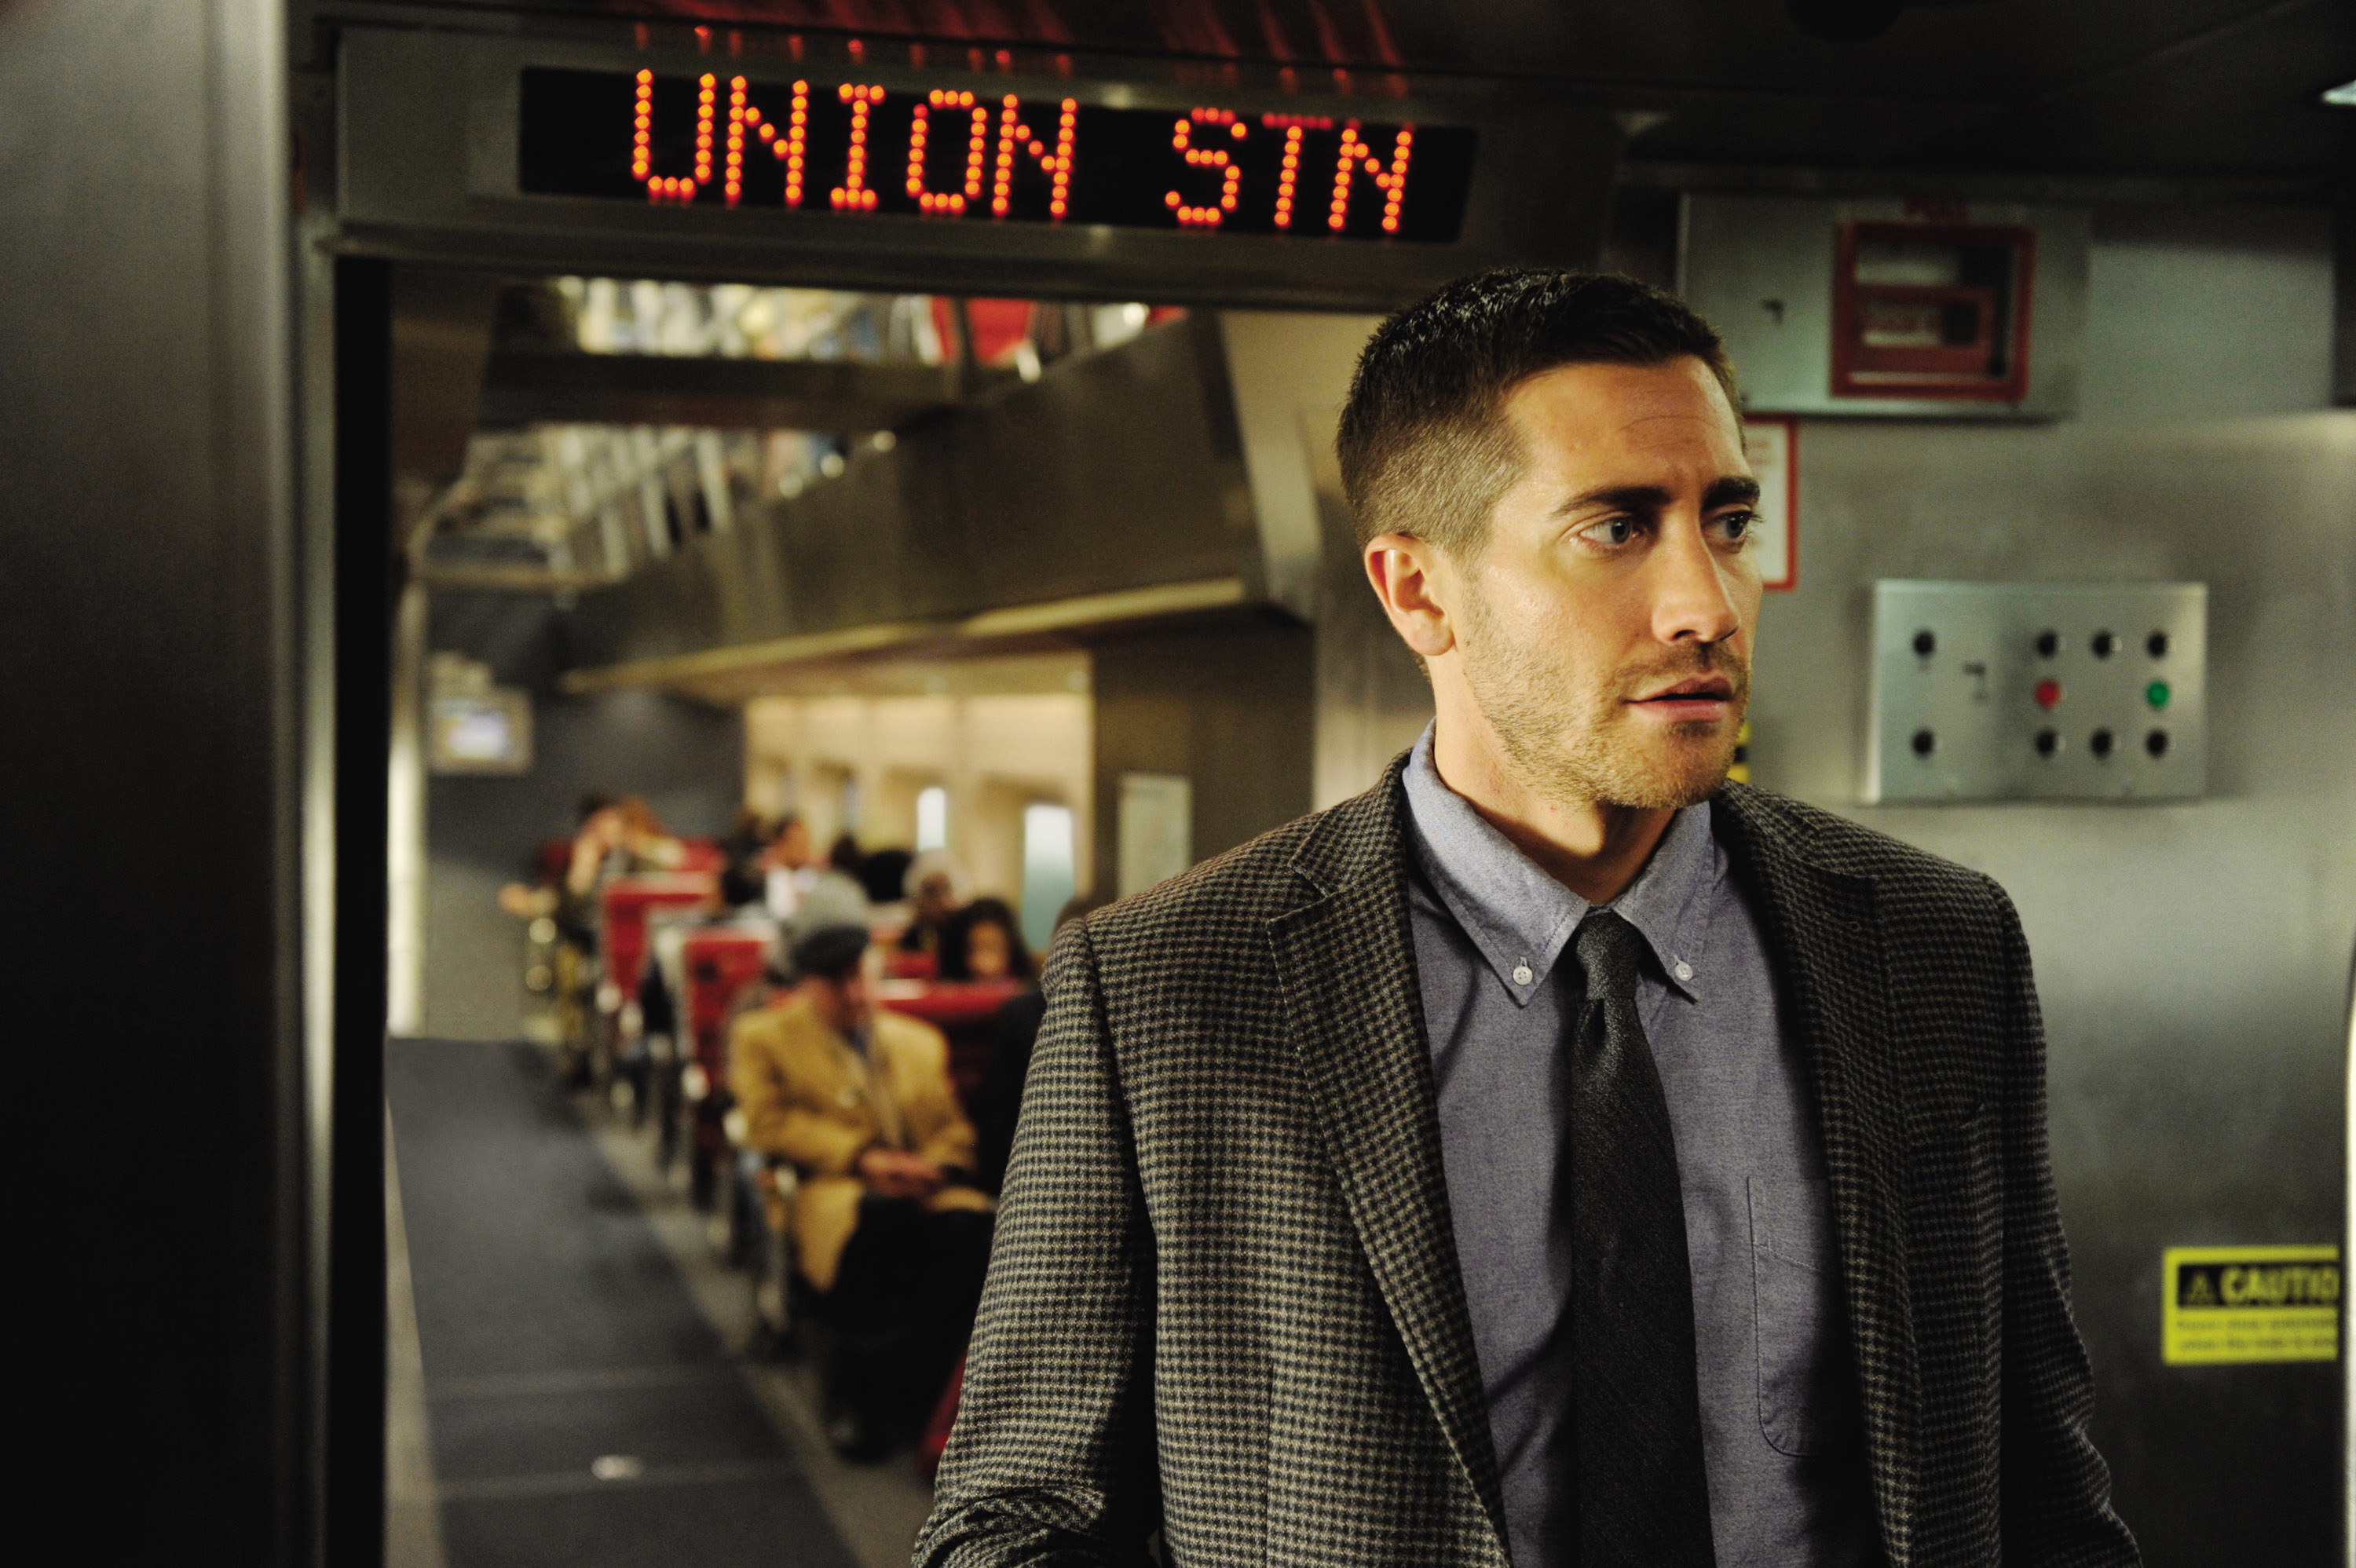 Jake Gyllenhaal stands in a train aisle